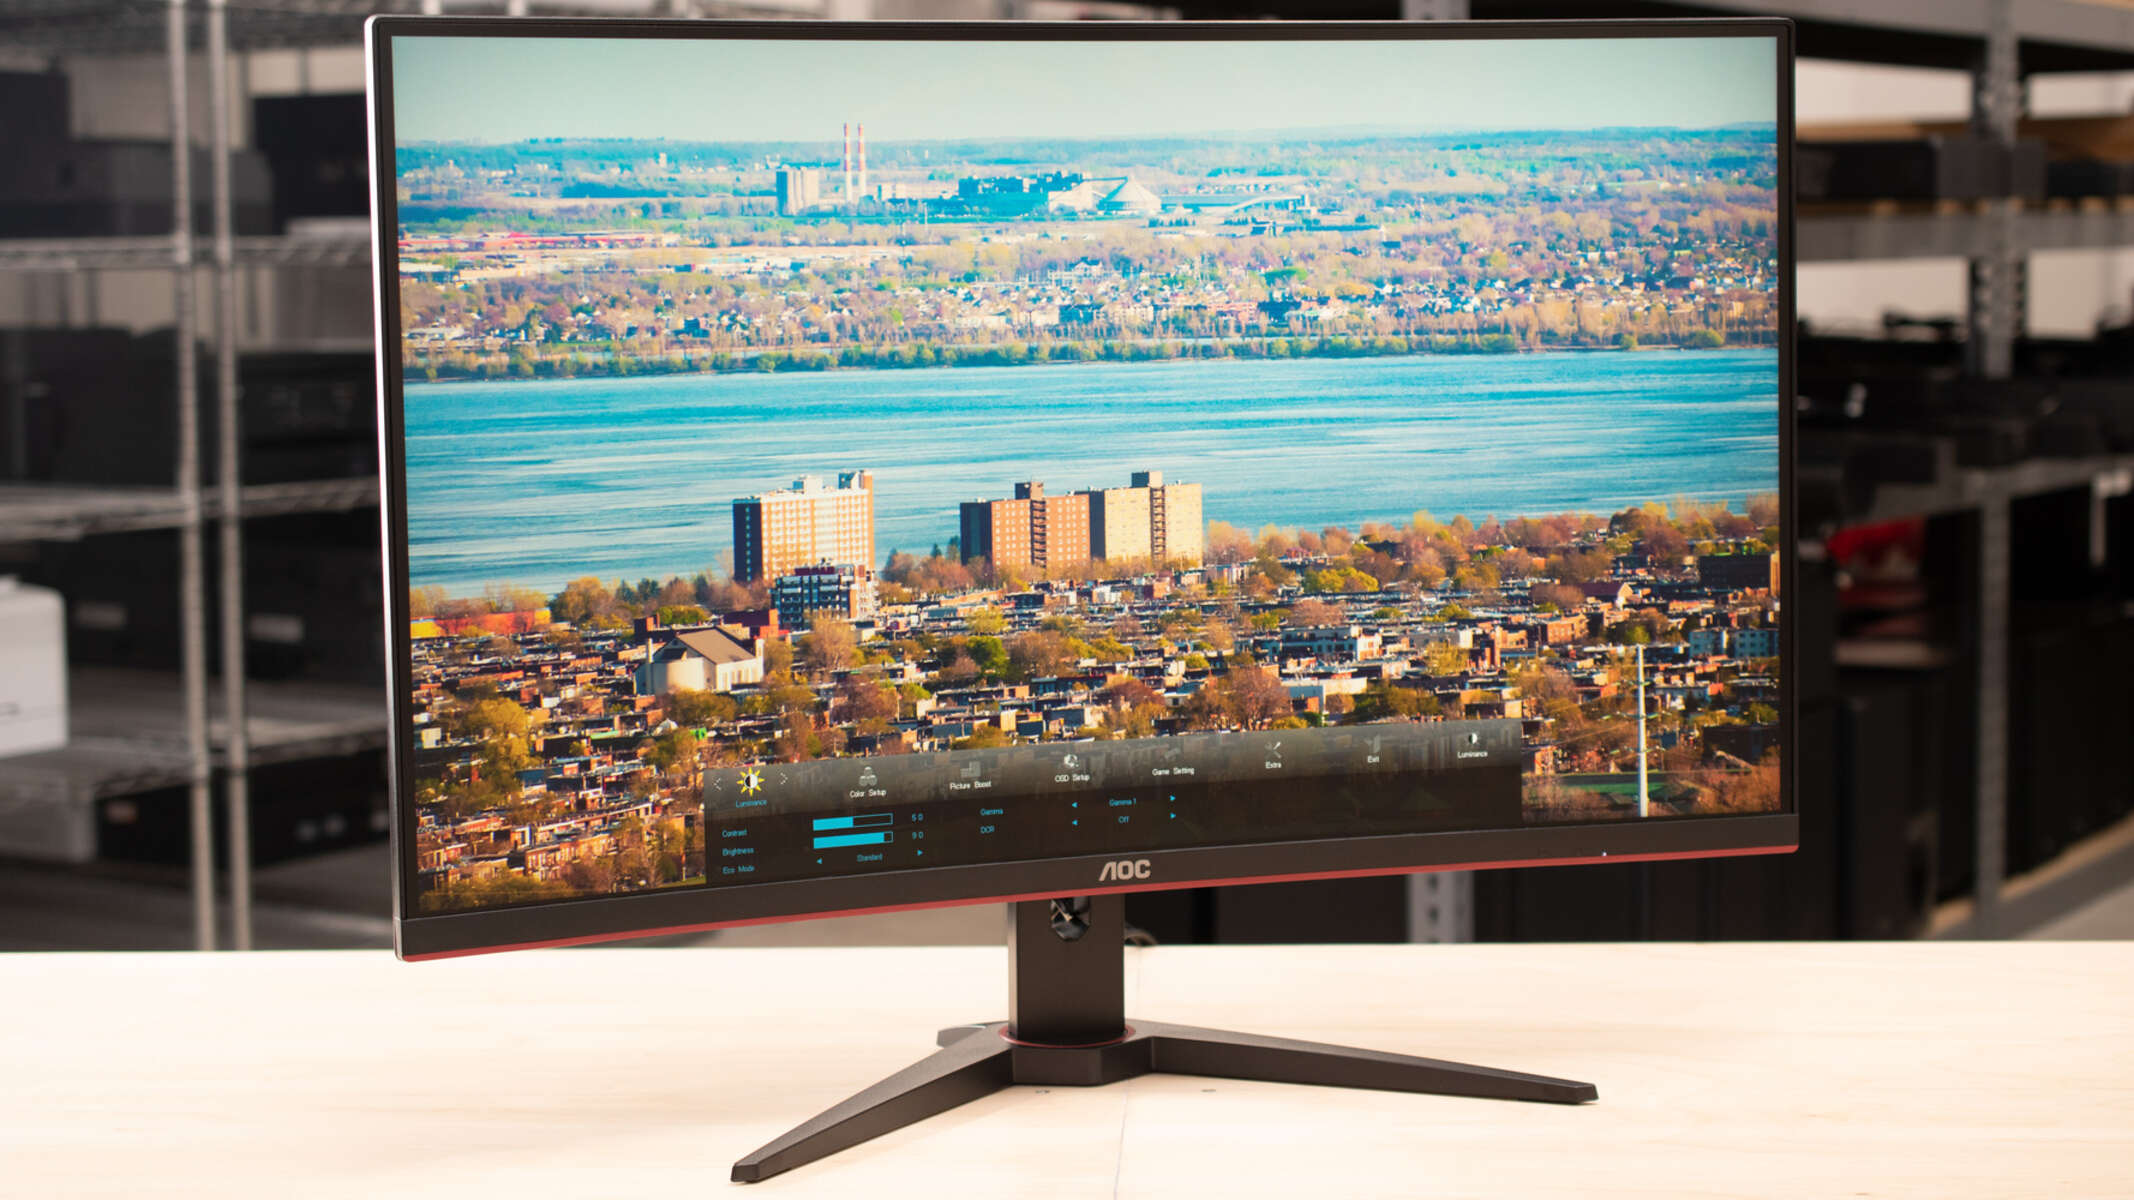 AOC C32G1 32 Curved Frameless Gaming Monitor FHD 1920×1080 VA: How To Image Setup